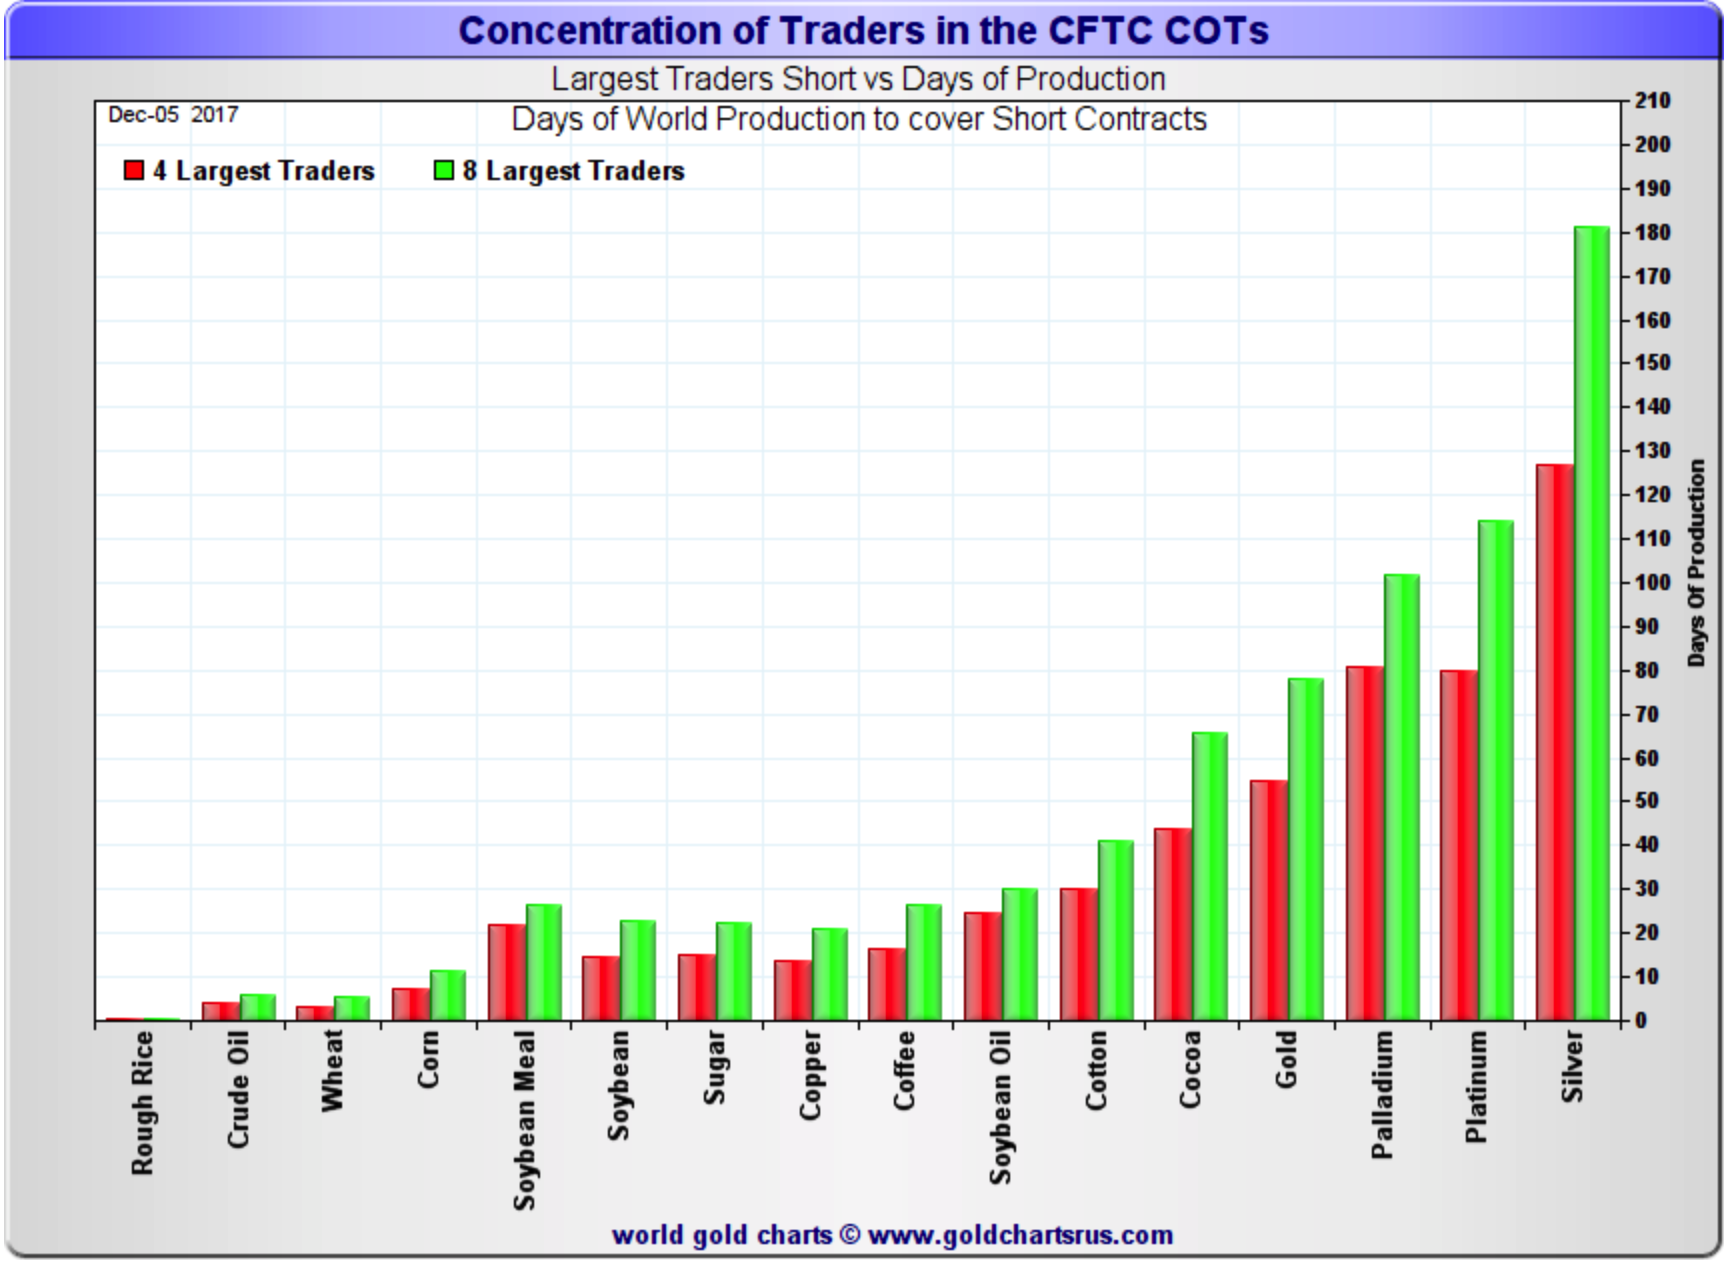 Buy Gold, Silver Time After Speculators Reduce Longs and Banks Reduce Shorts